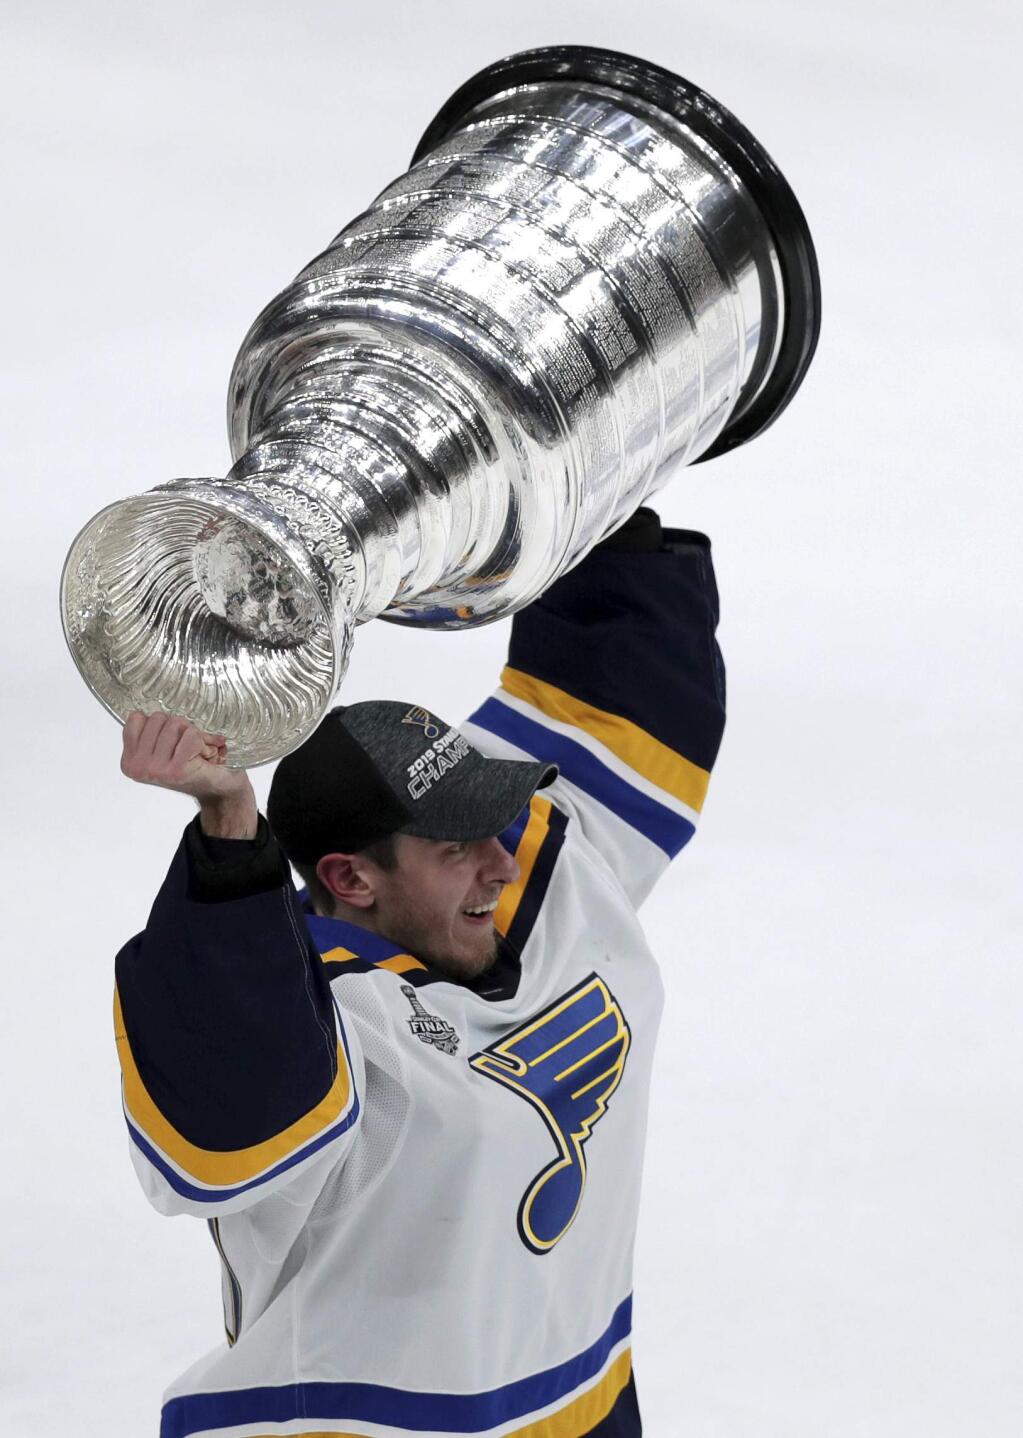 St. Louis Blues goaltender Jordan Binnington carries the Stanley Cup after the Blues defeated the Boston Bruins in Game 7 of the NHL Stanley Cup Final, Wednesday, June 12, 2019, in Boston. (AP Photo/Charles Krupa)